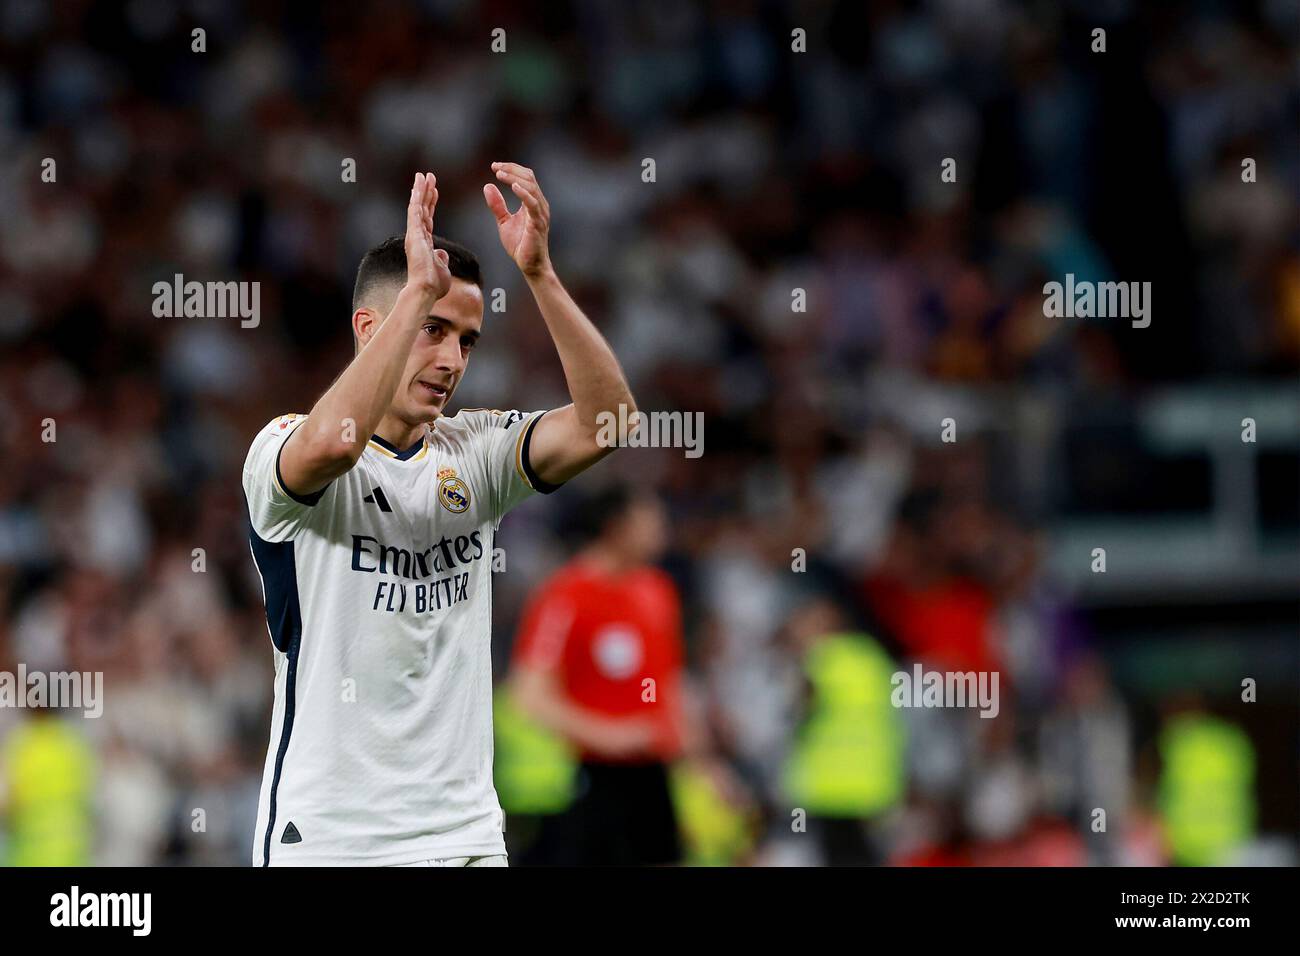 Madrid, Kingdom of Spain; 04/21/2024.- Real Madrid beats Barcelona 3-2 on matchday 32 of the Spanish Soccer League. Real Madrid with goals from Vinicius Jr. 12' (P), Lucas Vazque 73' and Jude Bellingham 90  1 wins the derby against Barcelona who scored two goals, Andreas Christensen 6' and Fermin Lopez Marin 69' Match held at the Santiago Bernabeu Stadium in the capital of the Kingdom of Spain. Photo: Juan Carlos Rojas Stock Photo